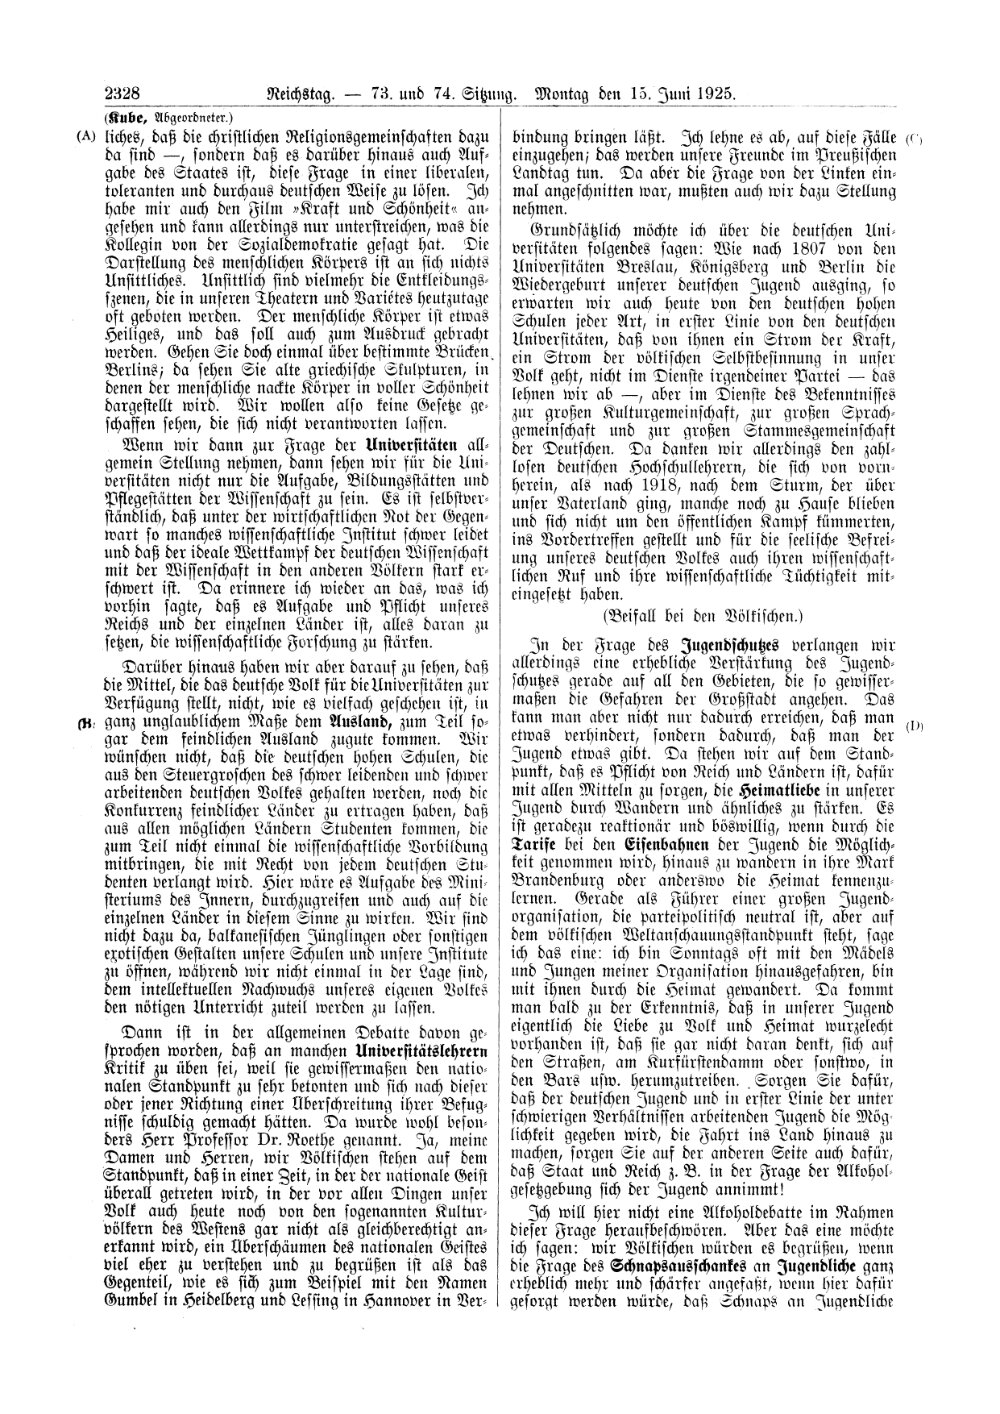 Scan of page 2328